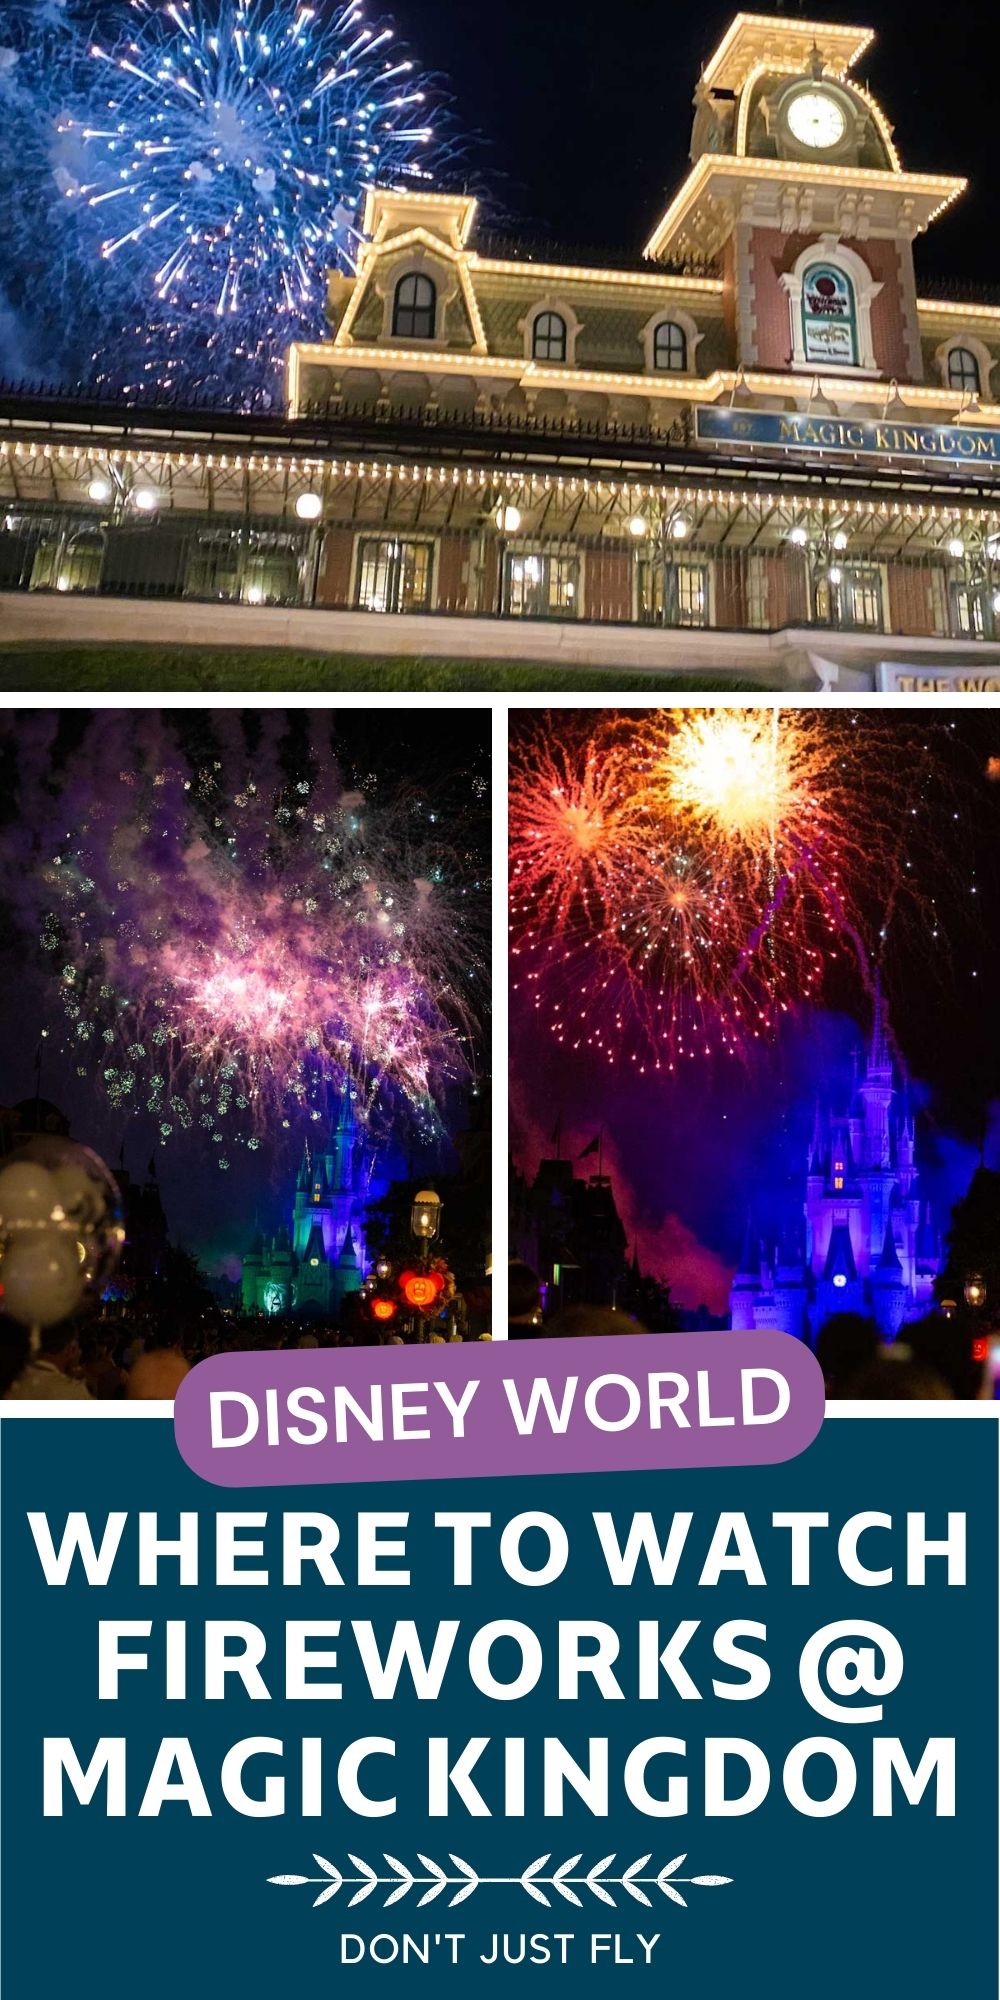 A photo collage shows several spots for watching the Disney fireworks in Magic Kingdom